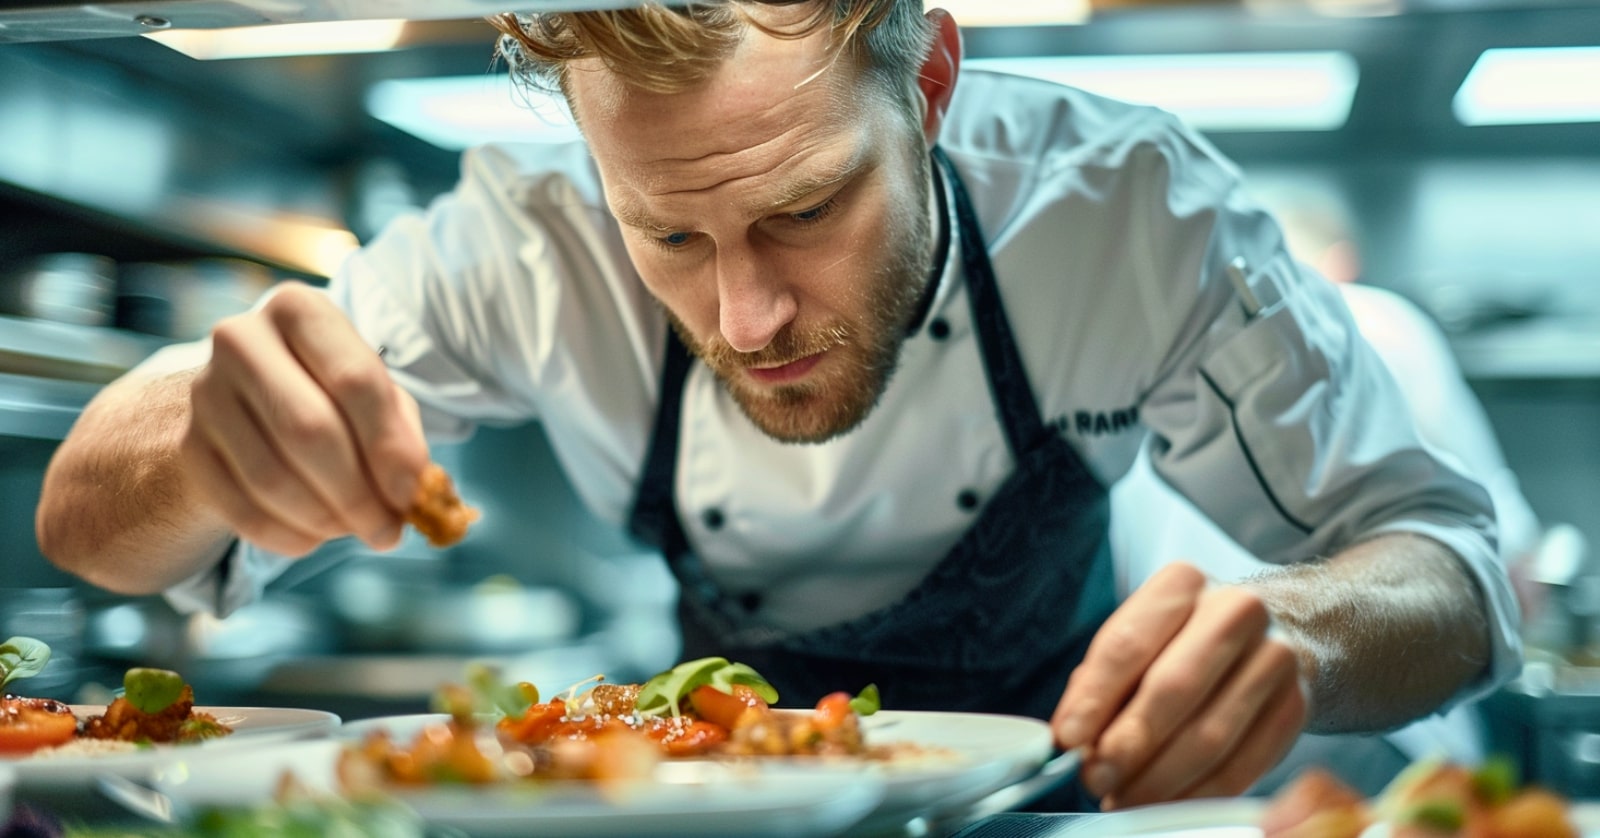 male chef putting the finishing touches to some plates in a restaurant kitchen